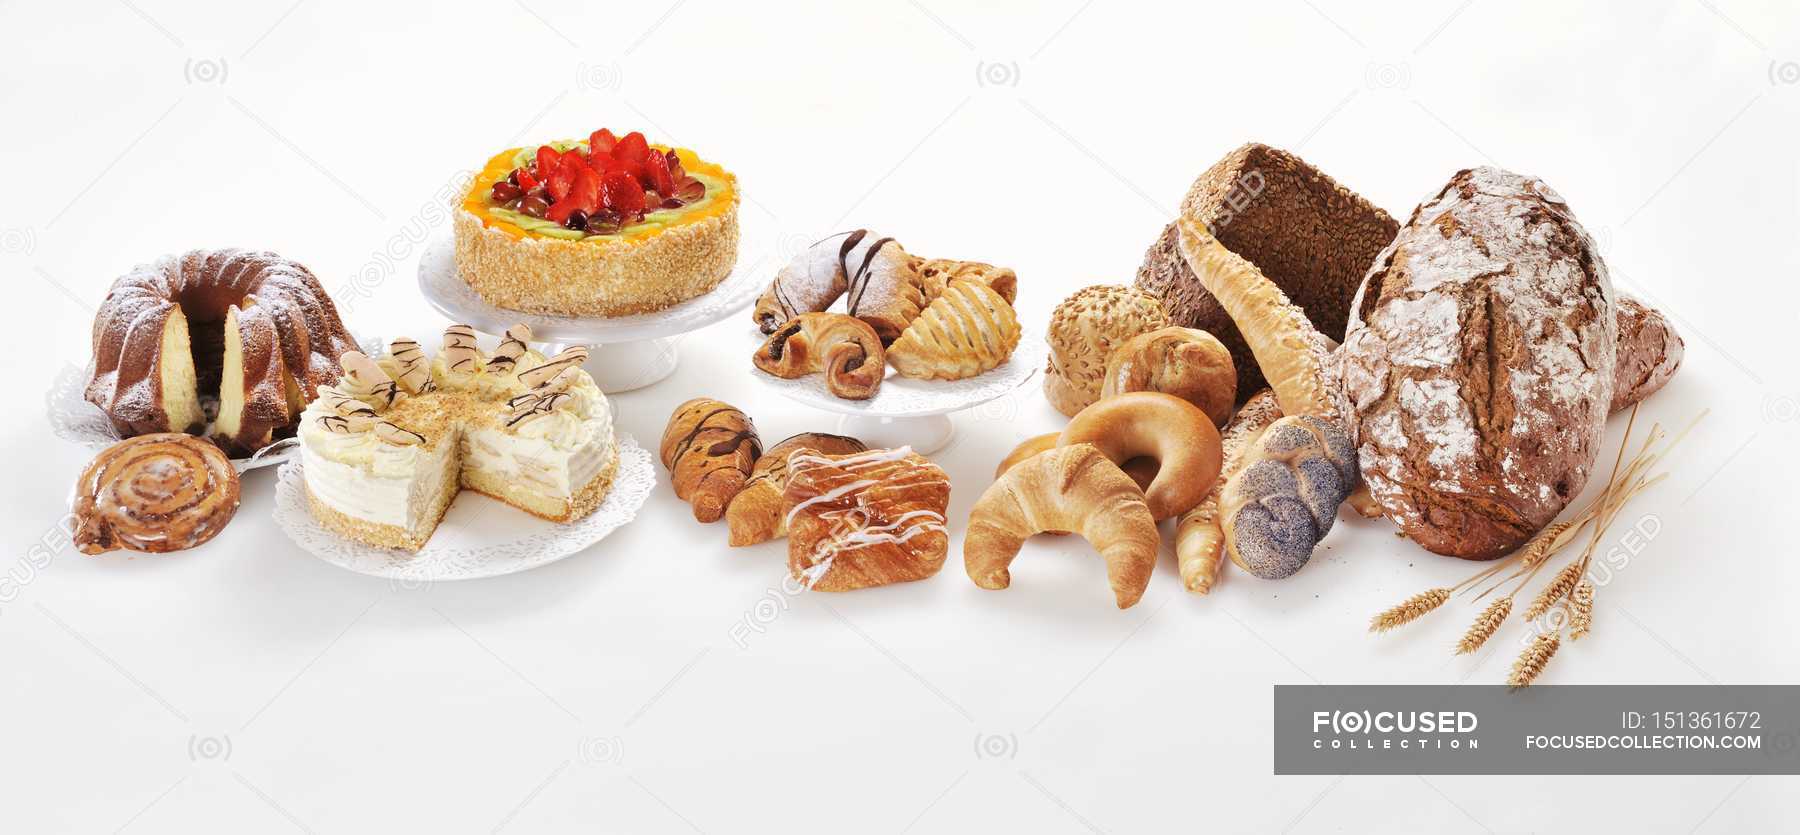 Global Frozen Bakery Products Market Report 2022-2028 Industry Size, Share,  Trends, & Forecast | Facts & Factors